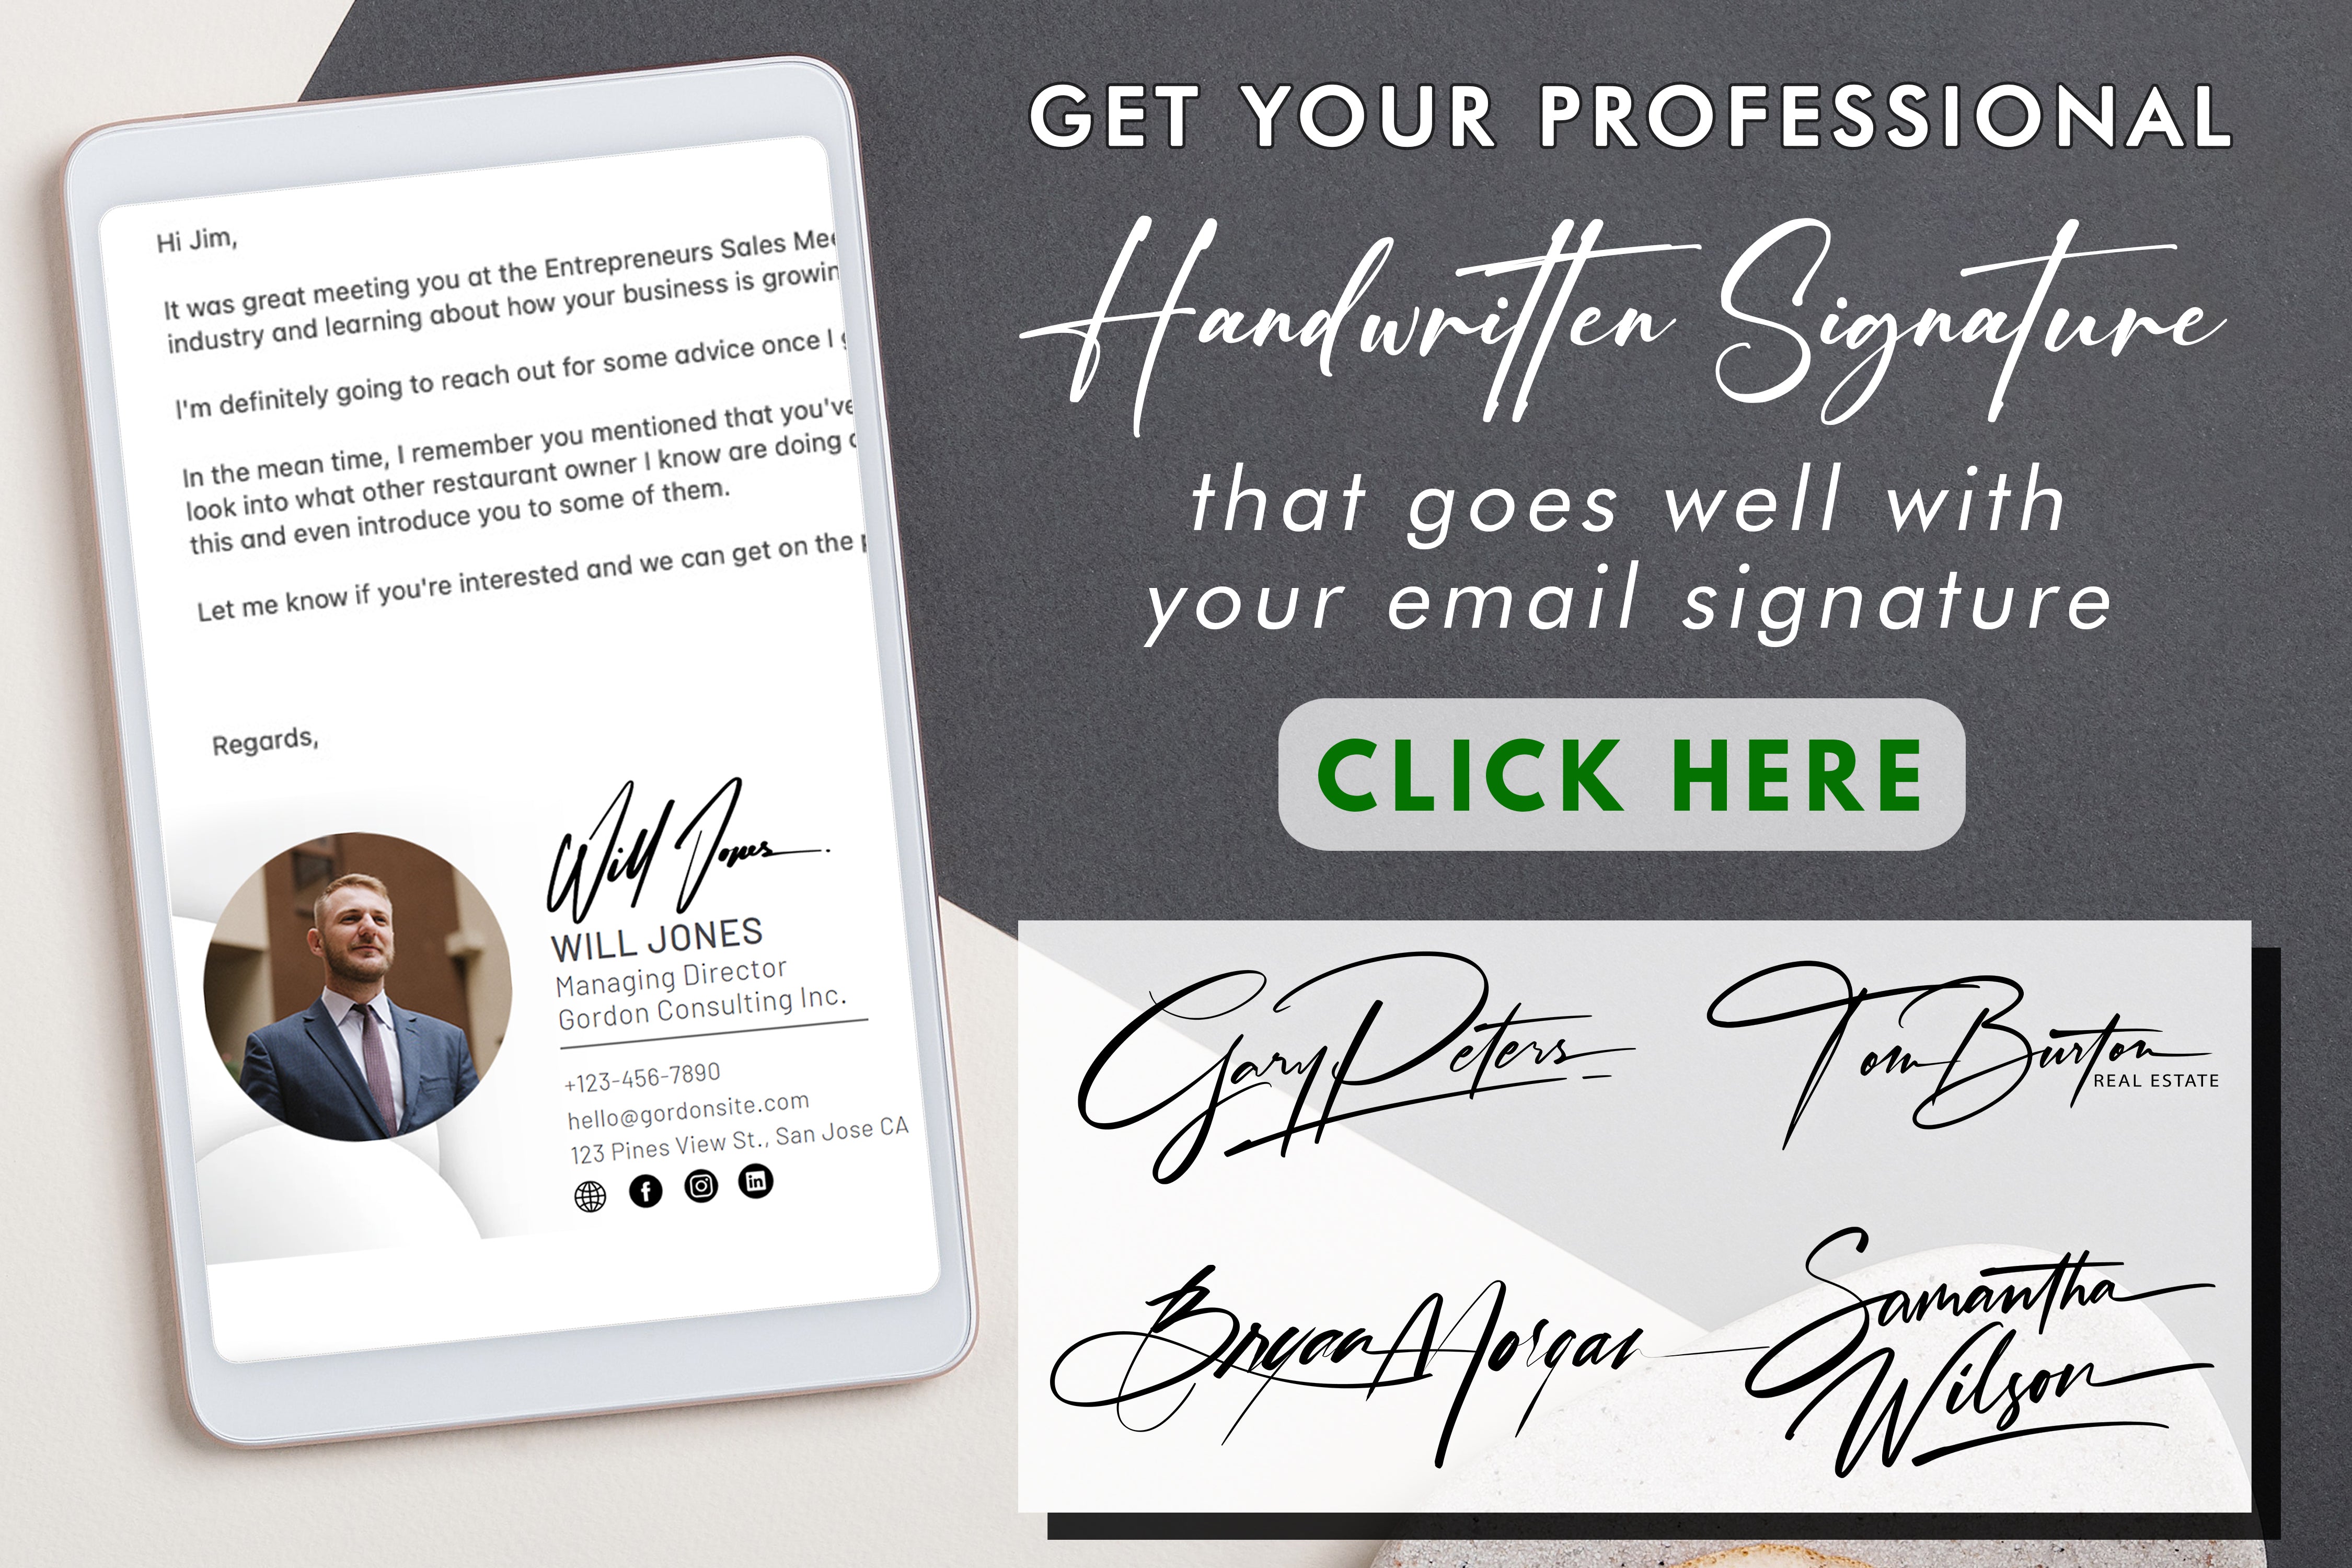 Master the art of crafting impactful emails with step-by-step guidance on creating professional email templates. Elevate your communication strategy today!